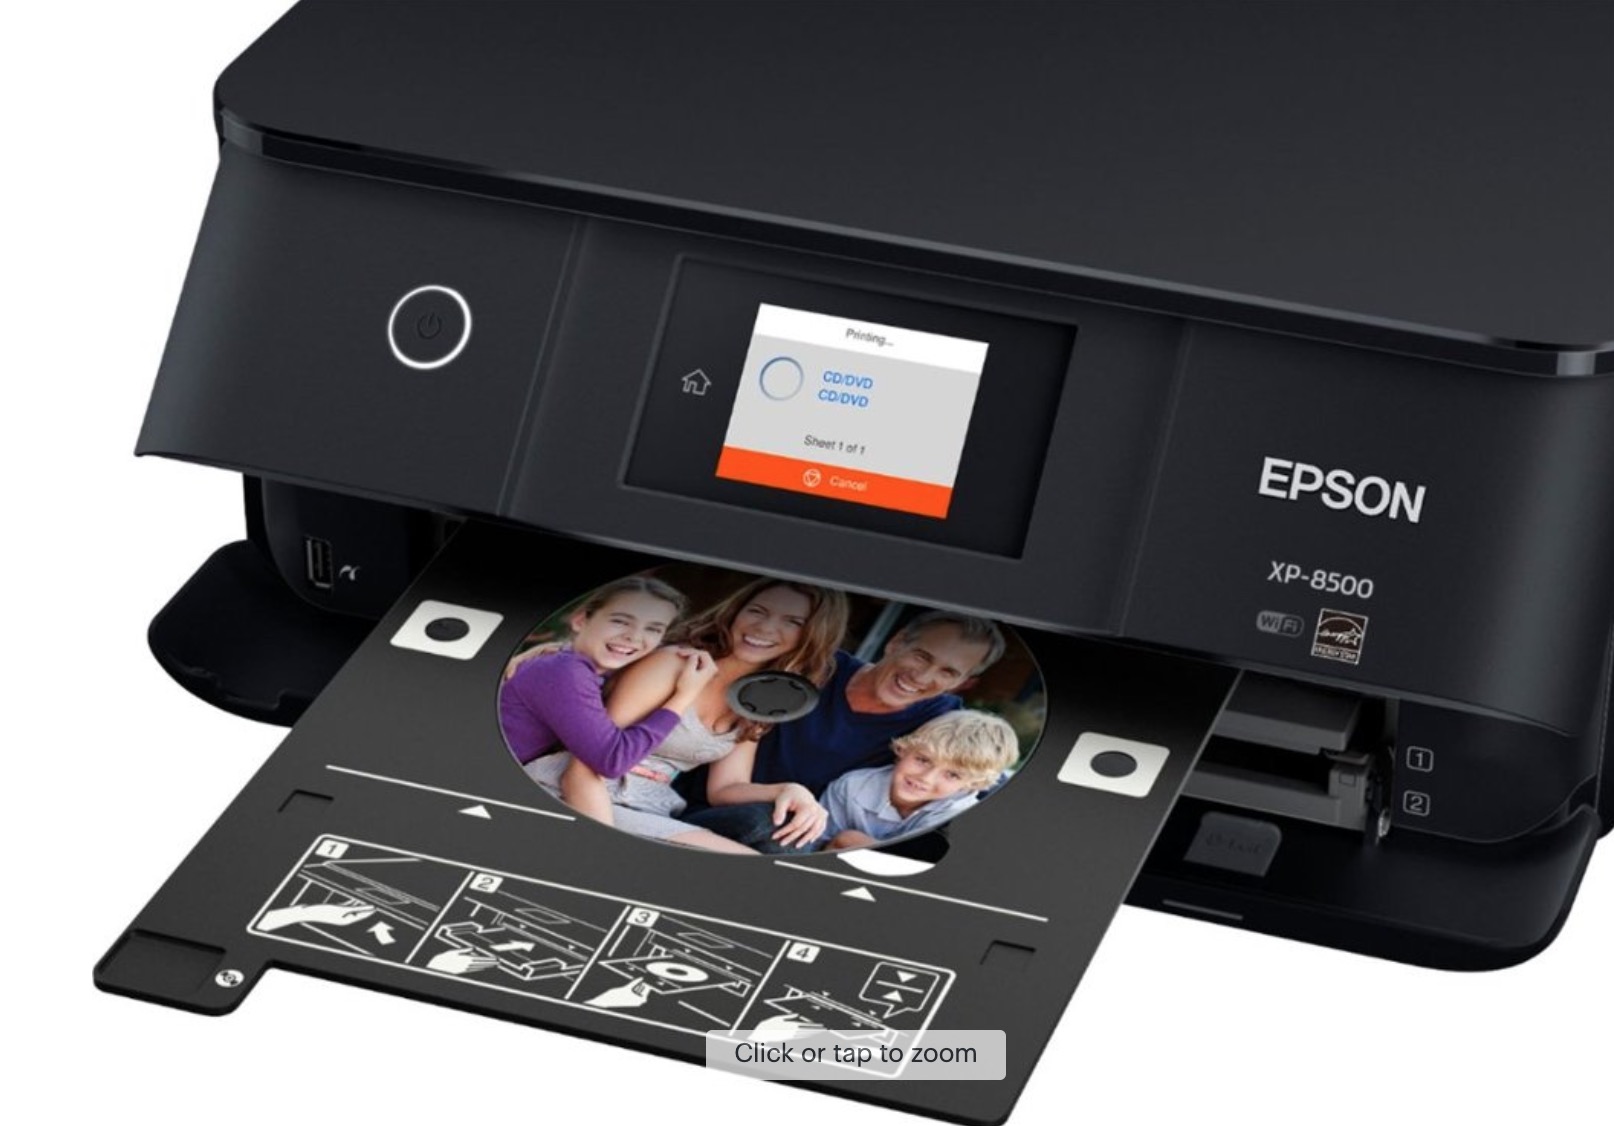 tvivl tag motor Epson XP 8500 Printer with DVD Printing Capability and Ink Cartridges -  VIDEOLANE.COM ⏩